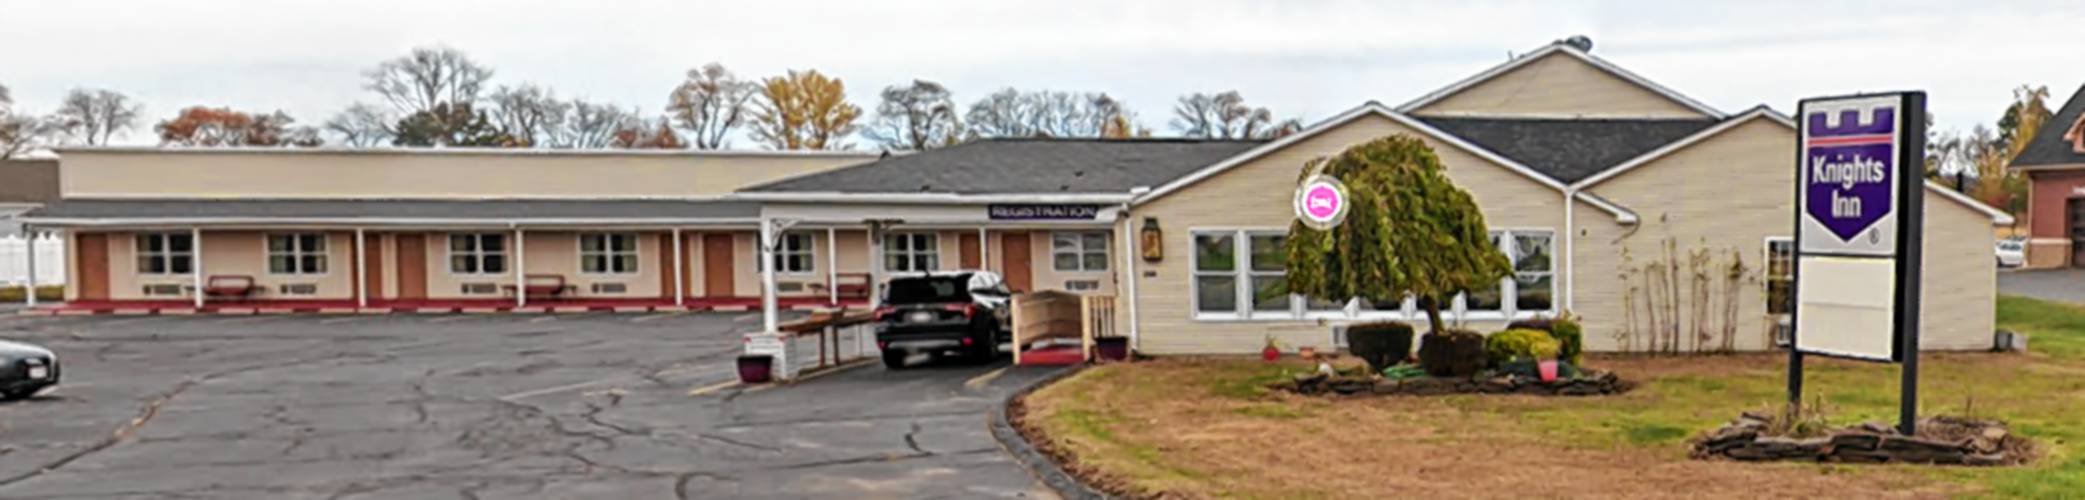 The Knights Inn at 208 Russell St. in Hadley has been selected by the state as a  supplemental shelter for unhoused Massachusetts families, with 34 individuals from four families recently placed there.